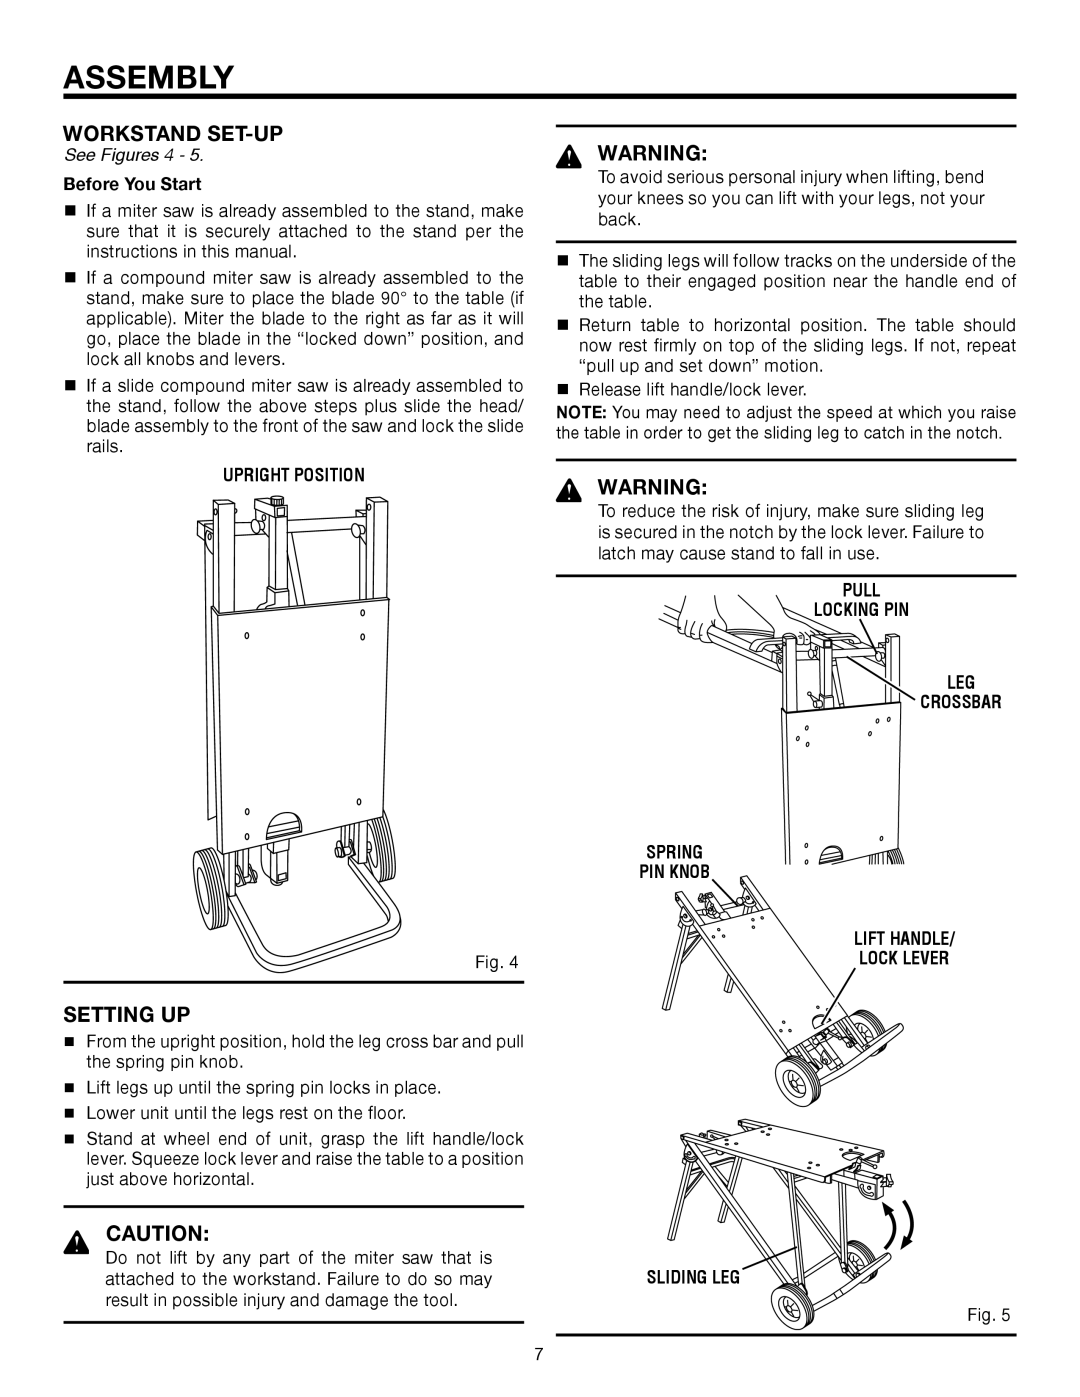 RIDGID AC99402 Workstand Set-Up, Setting Up, See Figures 4, Before You Start, Upright Position, Sliding Leg, Assembly 